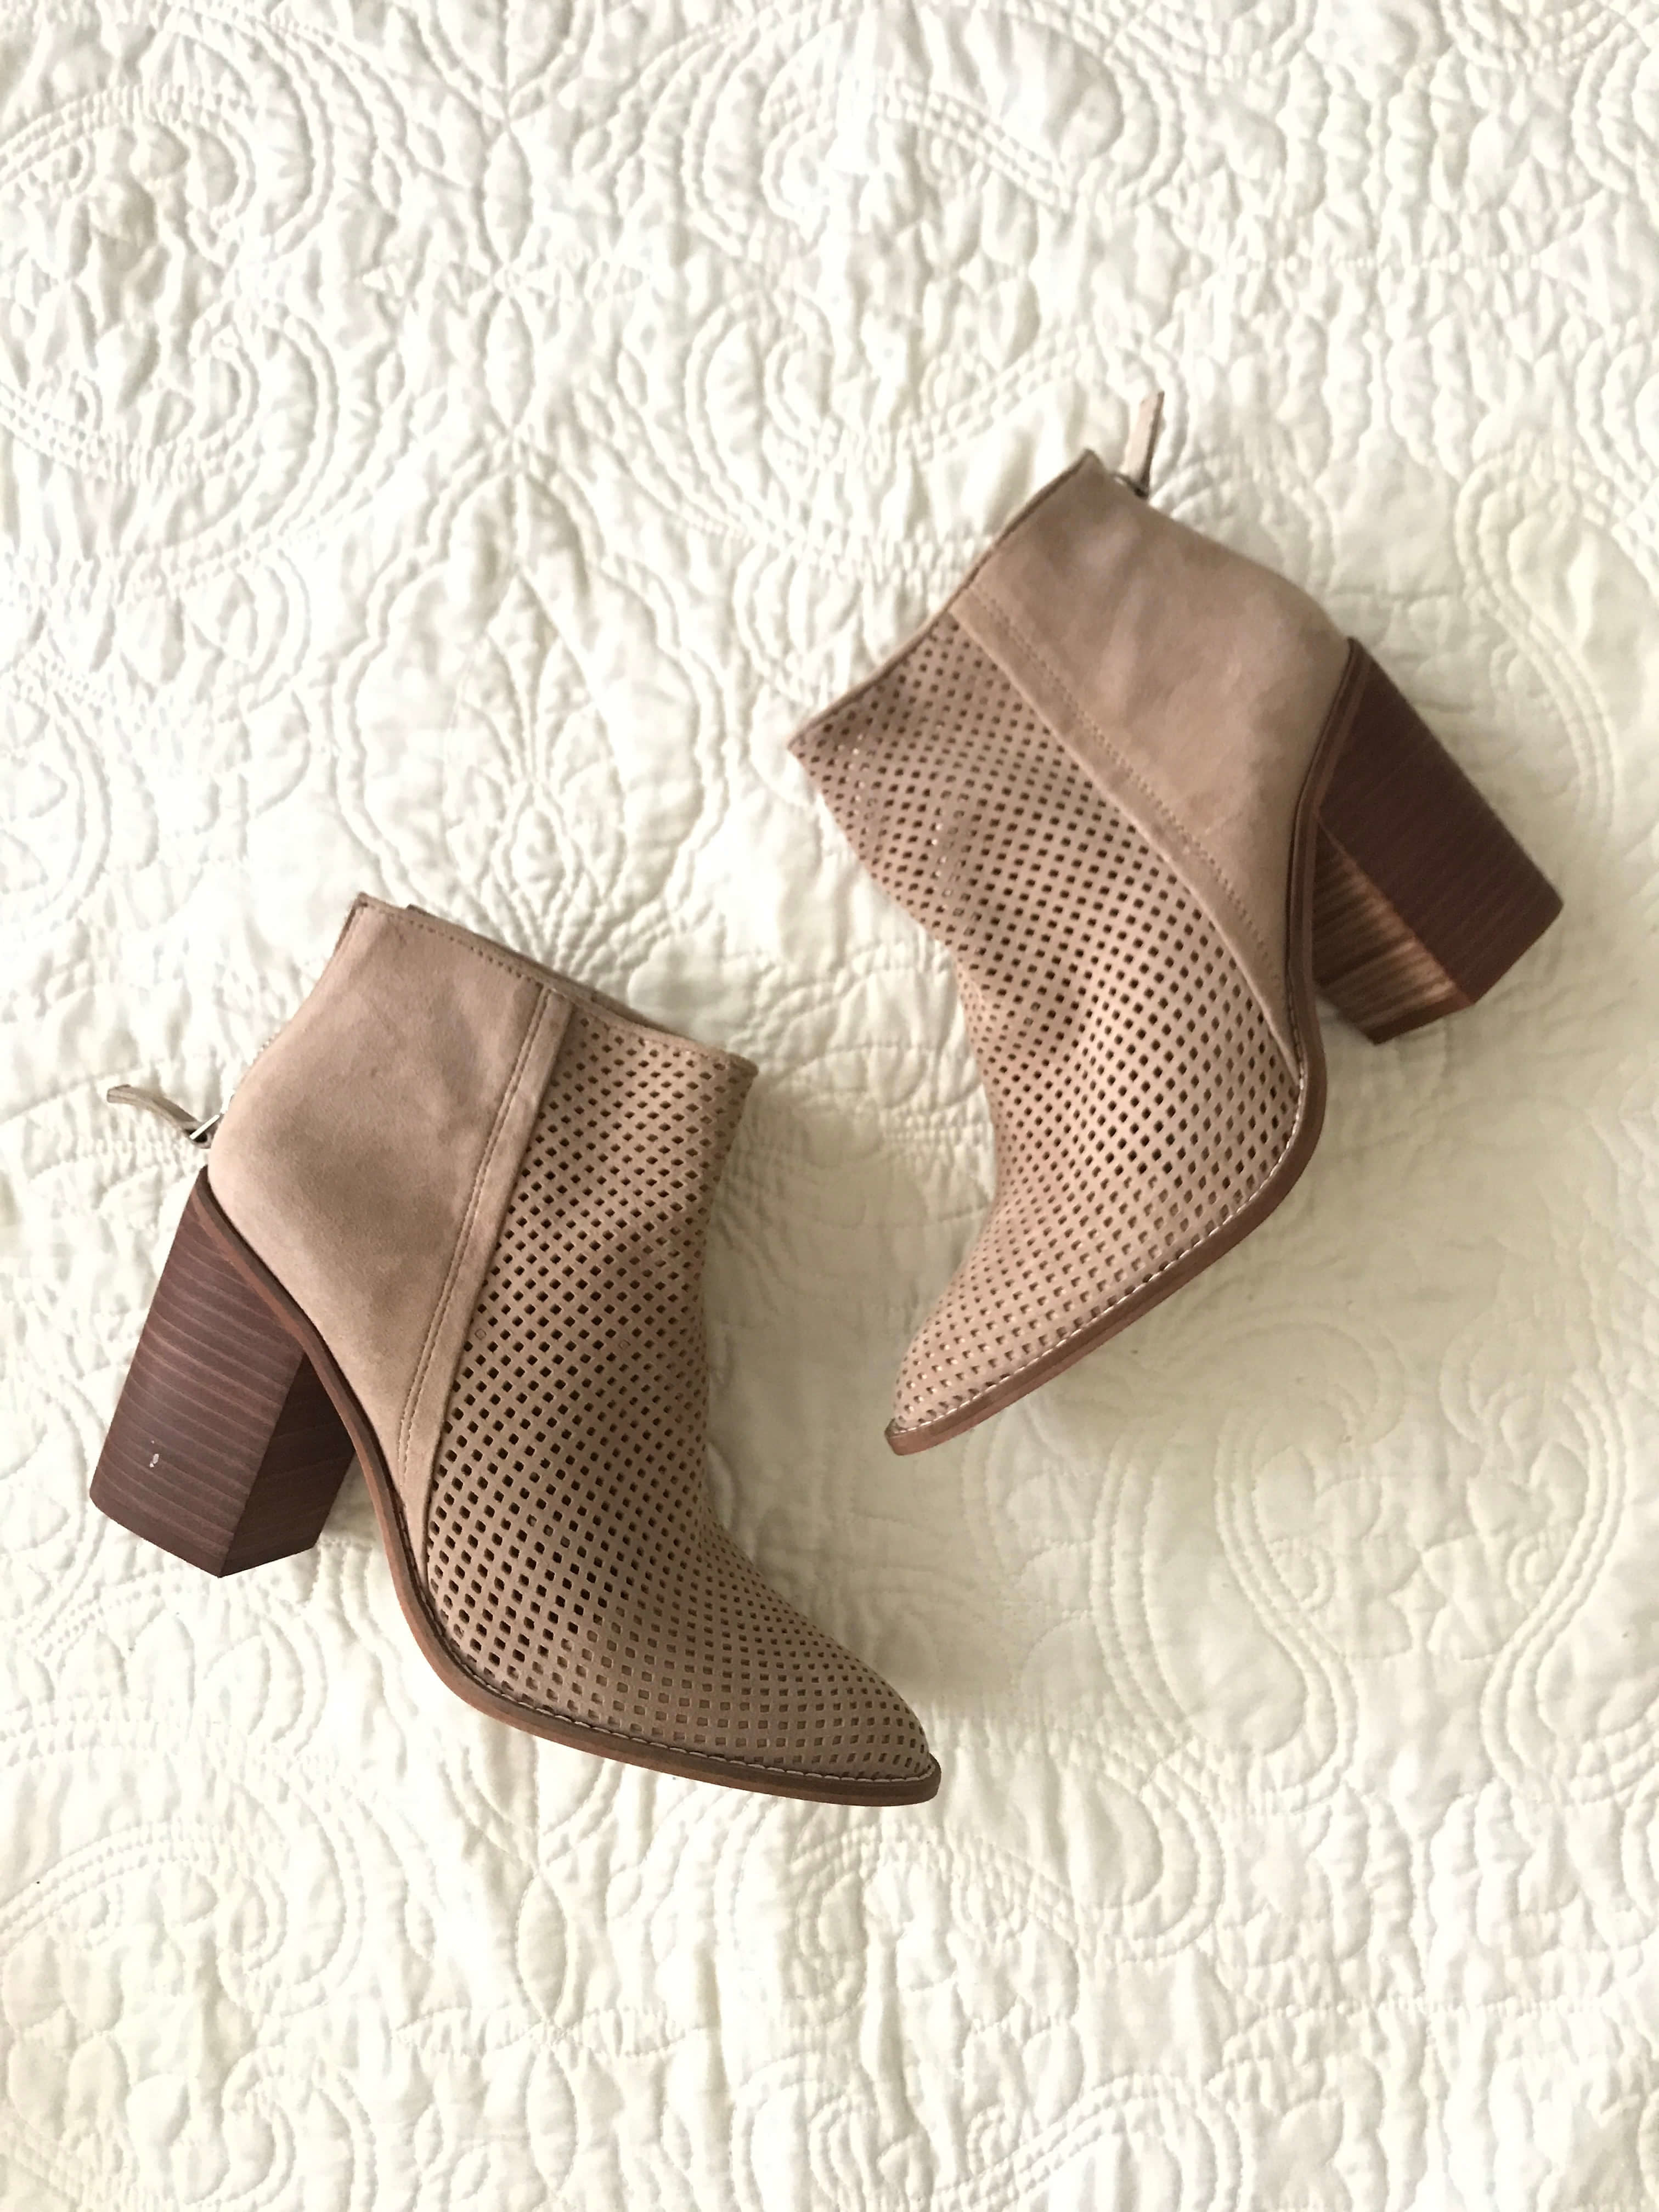 Steve Madden perforated booties - Top 10 Most Purchased Items- JULY! featured by popular Dallas fashion blogger Style Your Senses